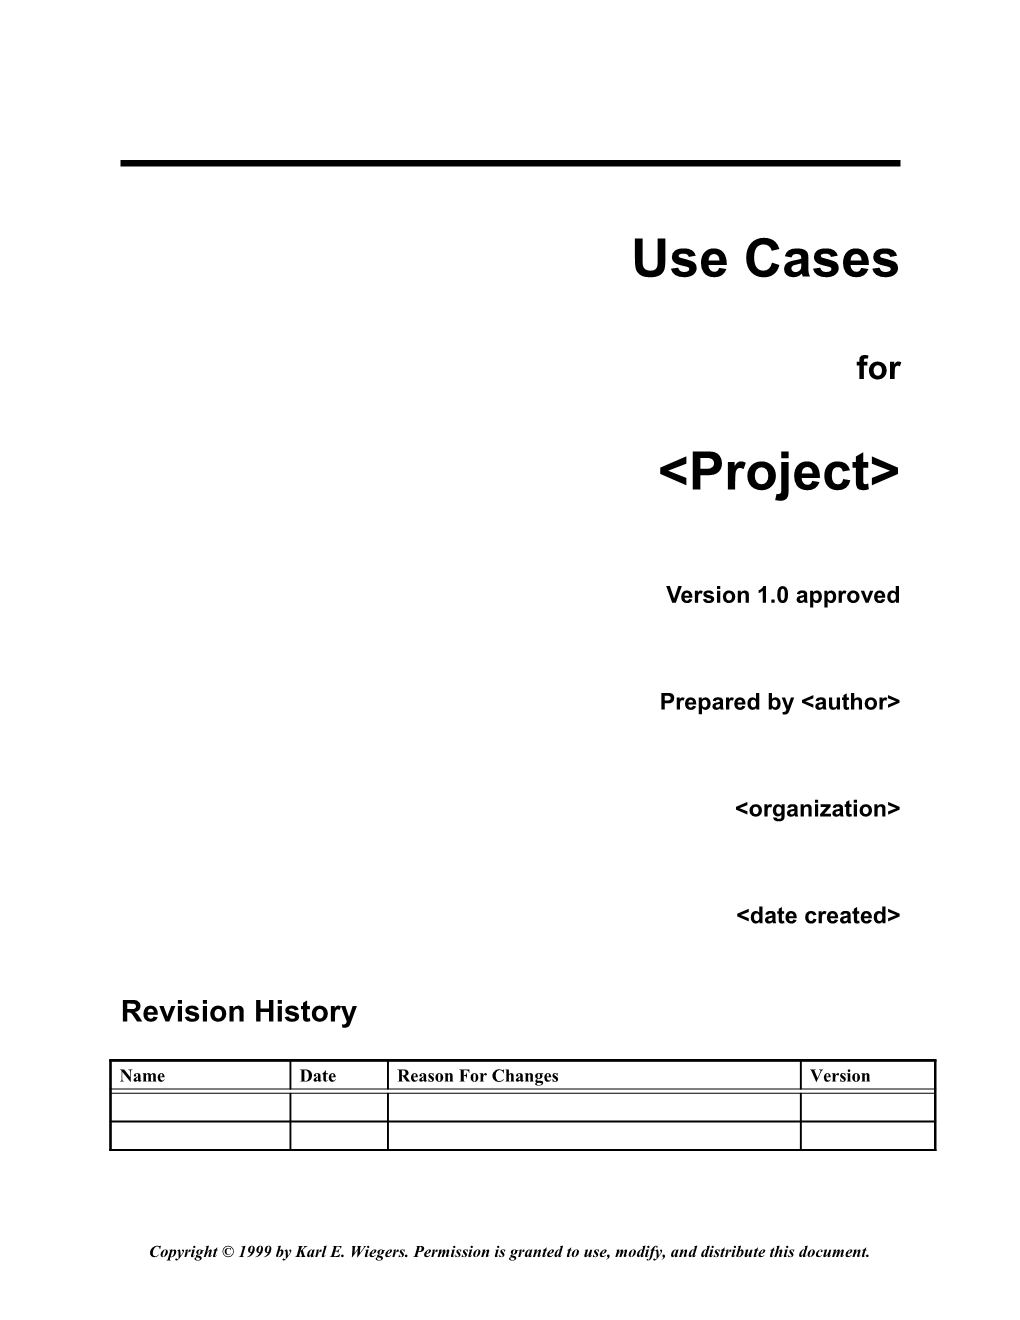 Use Case Template s1